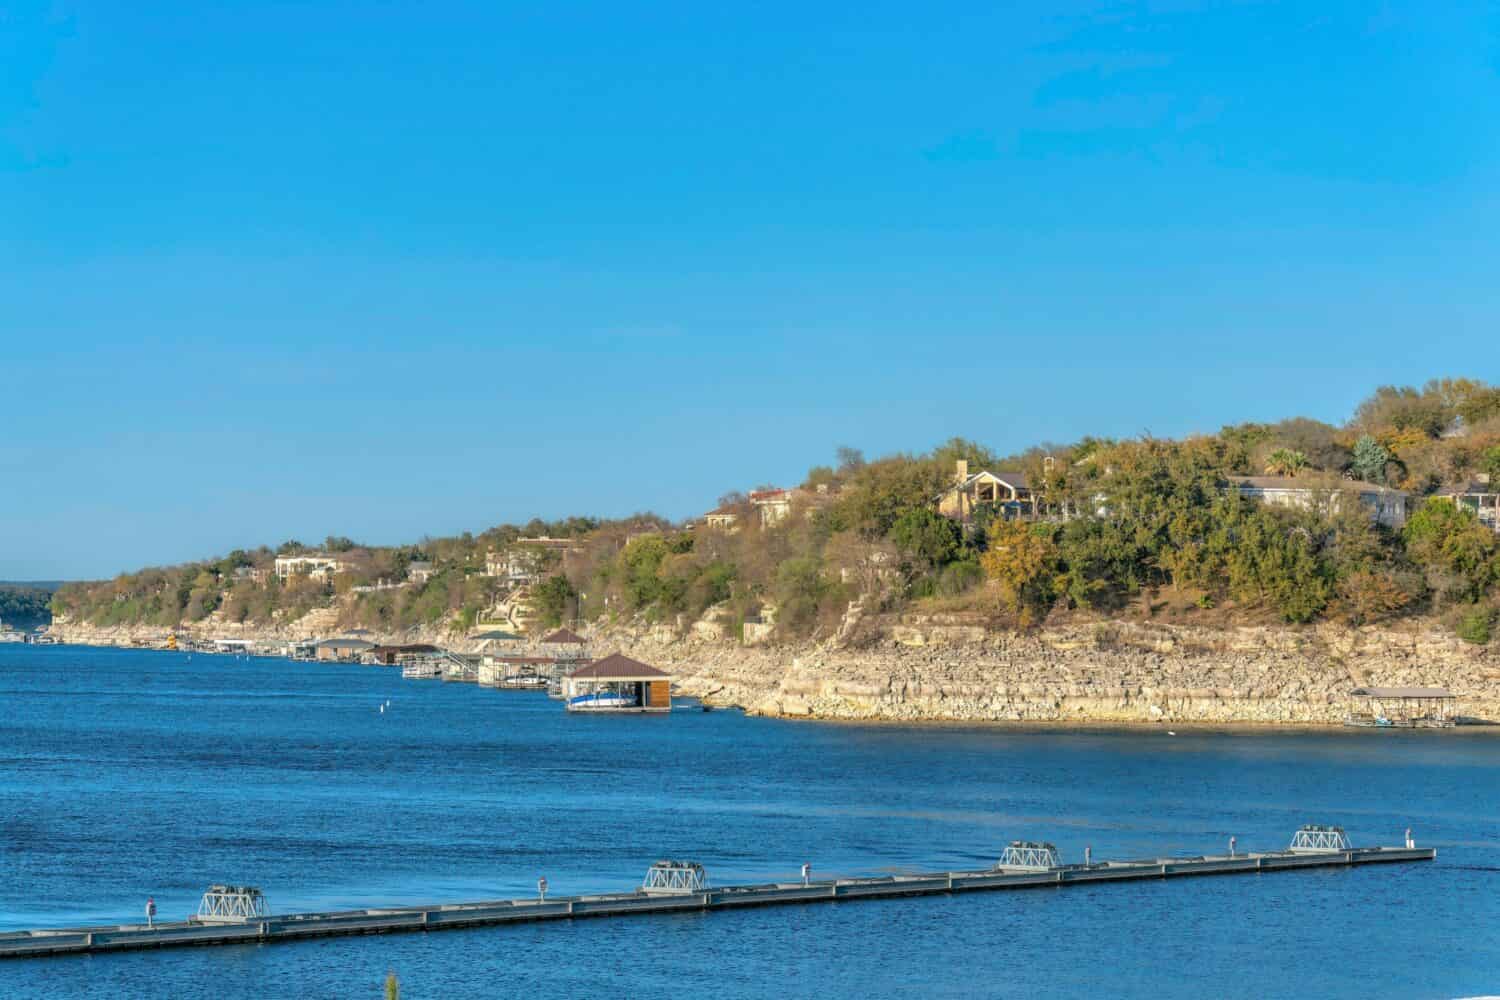 Lake Austin, Austin, Texas- Docks at the front of the rich neighborhood on top of the slope. There are large residential buildings on top with docks near the shore.